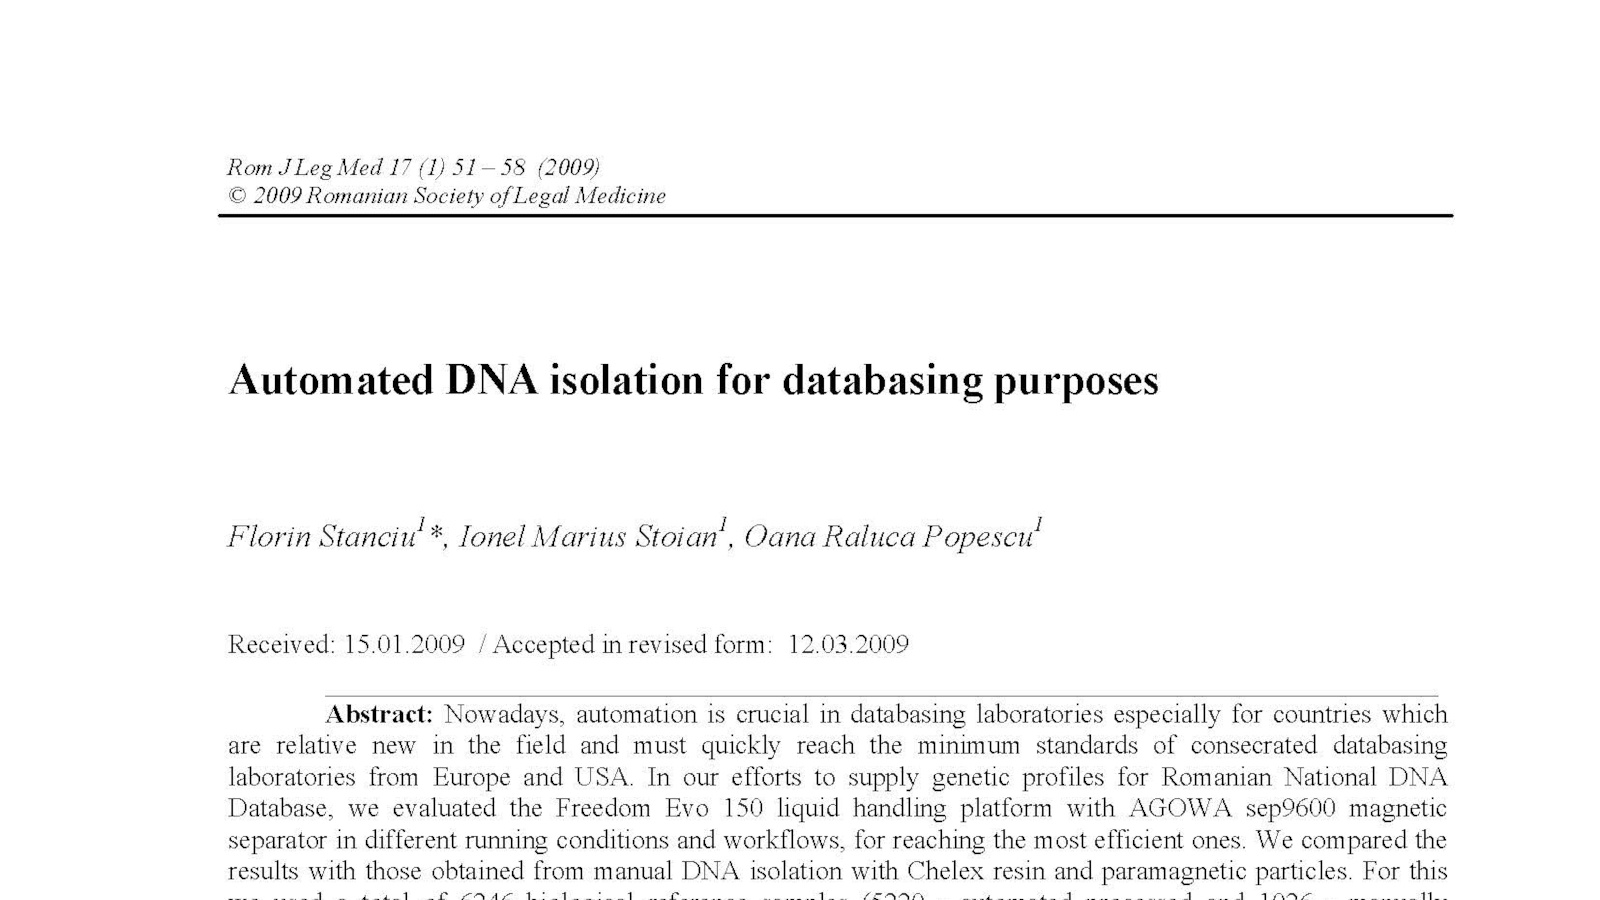 Automated DNA isolation for databasing purposes